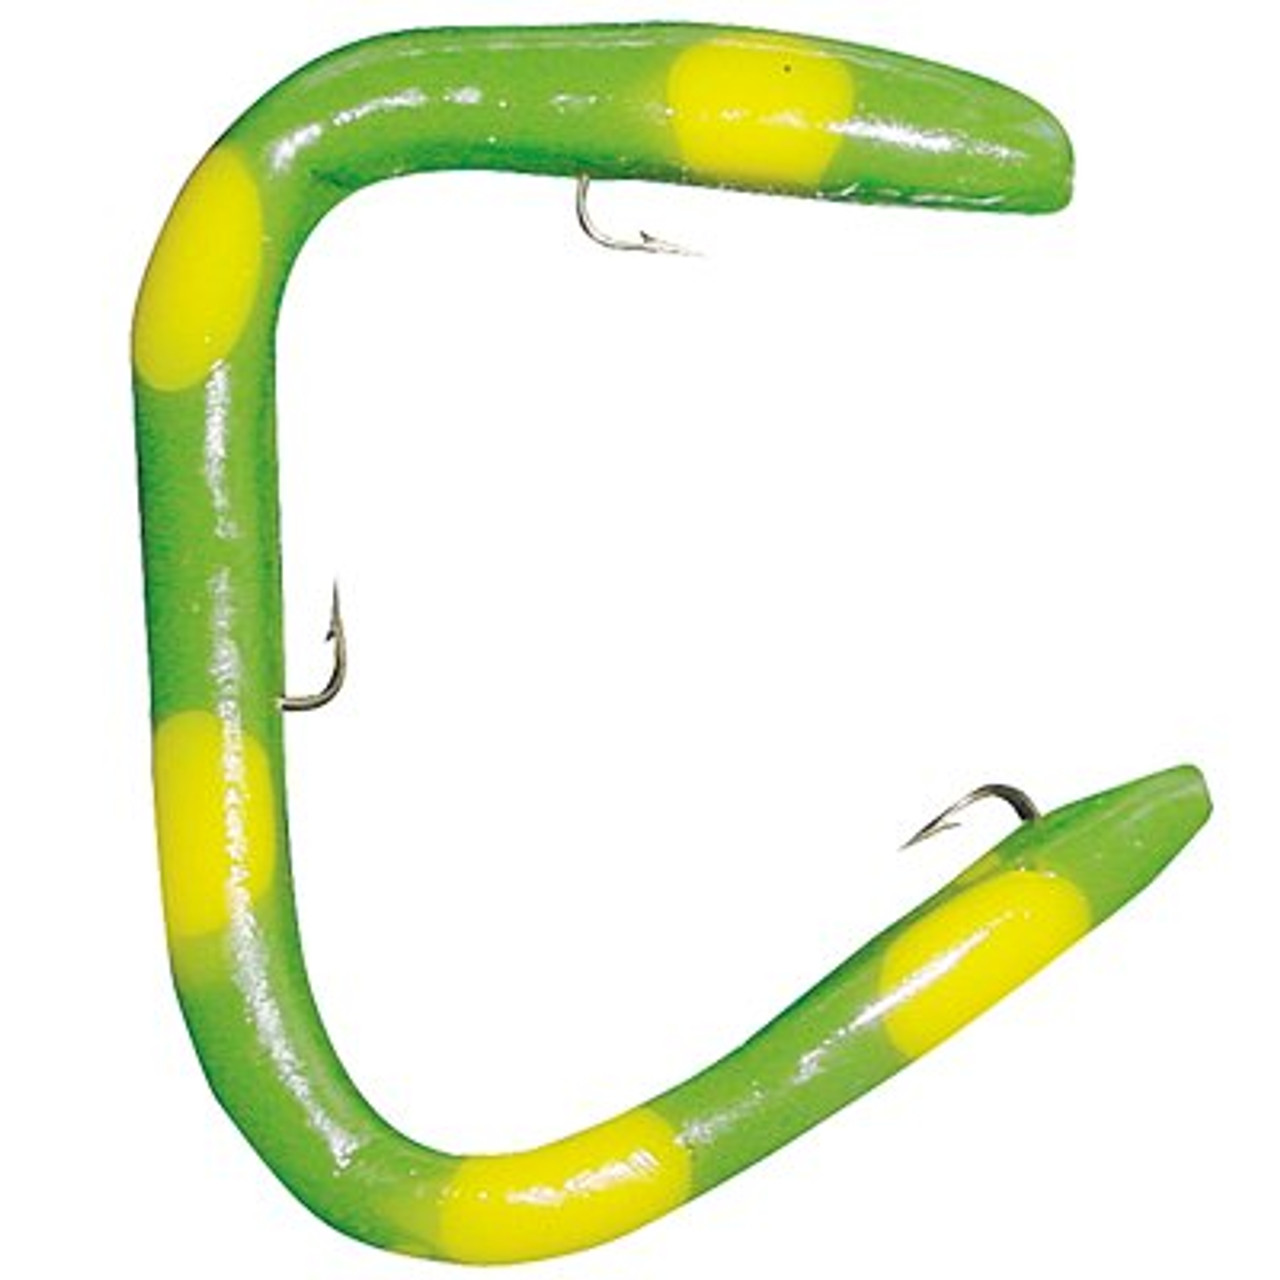 The Worm 6-1/4 - An Advantage For Anglers of Every Level